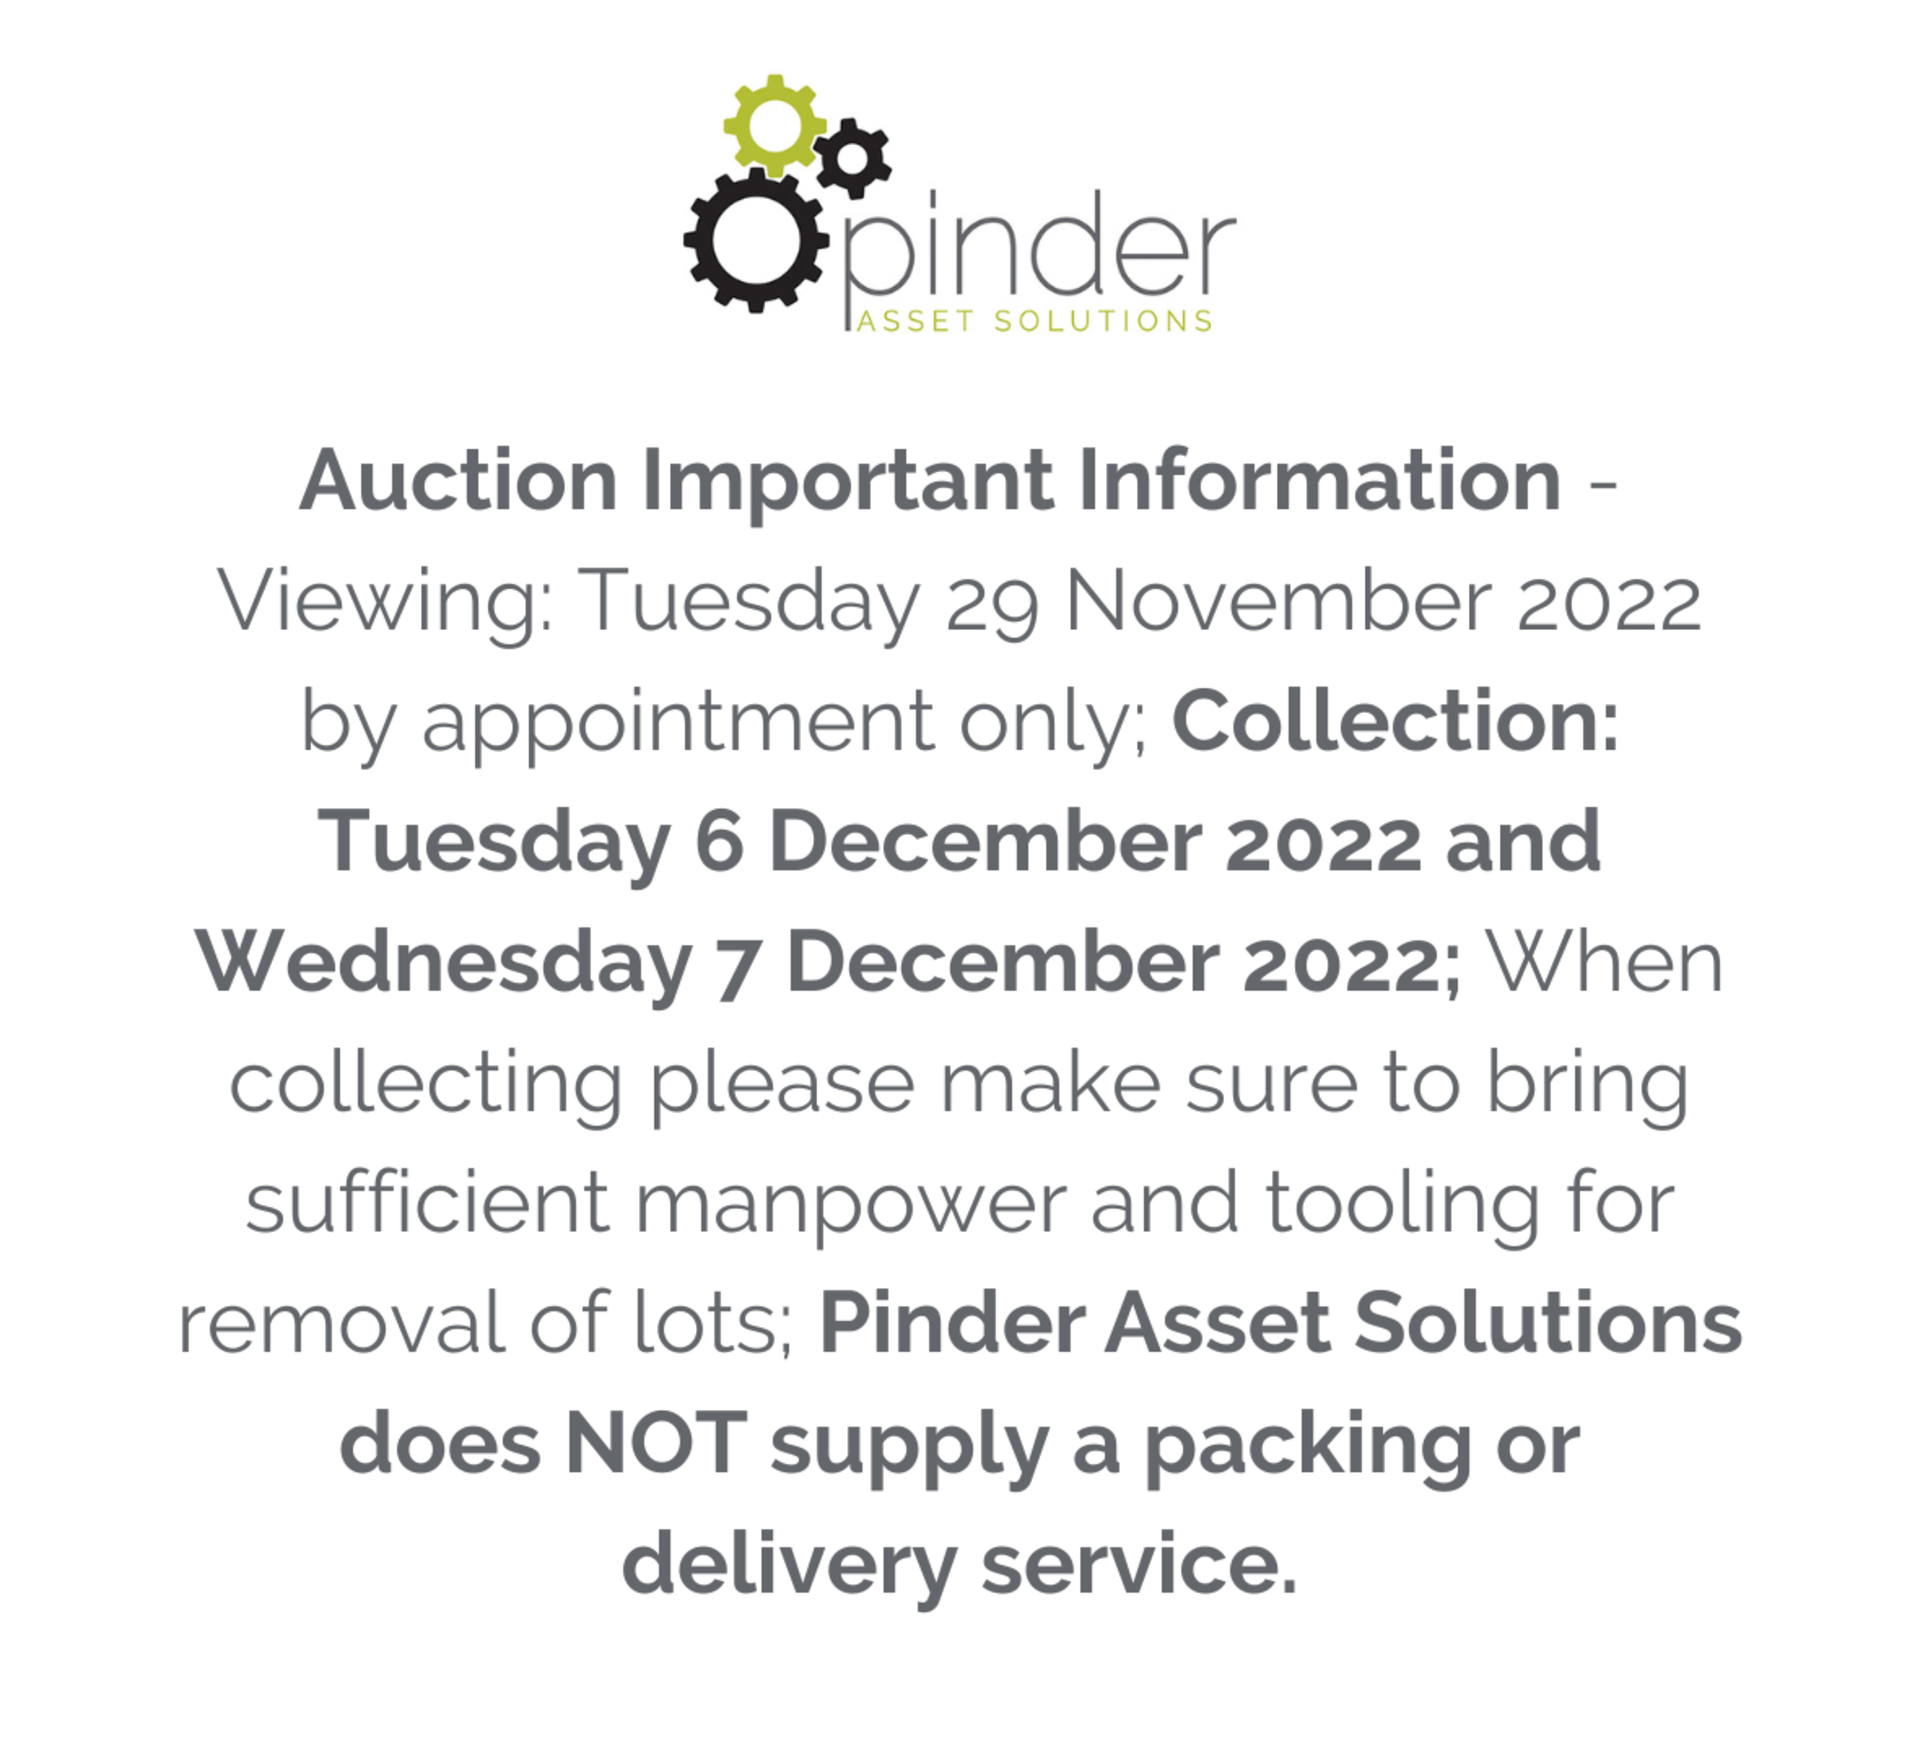 Auction Important Information - Viewing: Tuesday 29 November 2022 by appointment only; Collection: